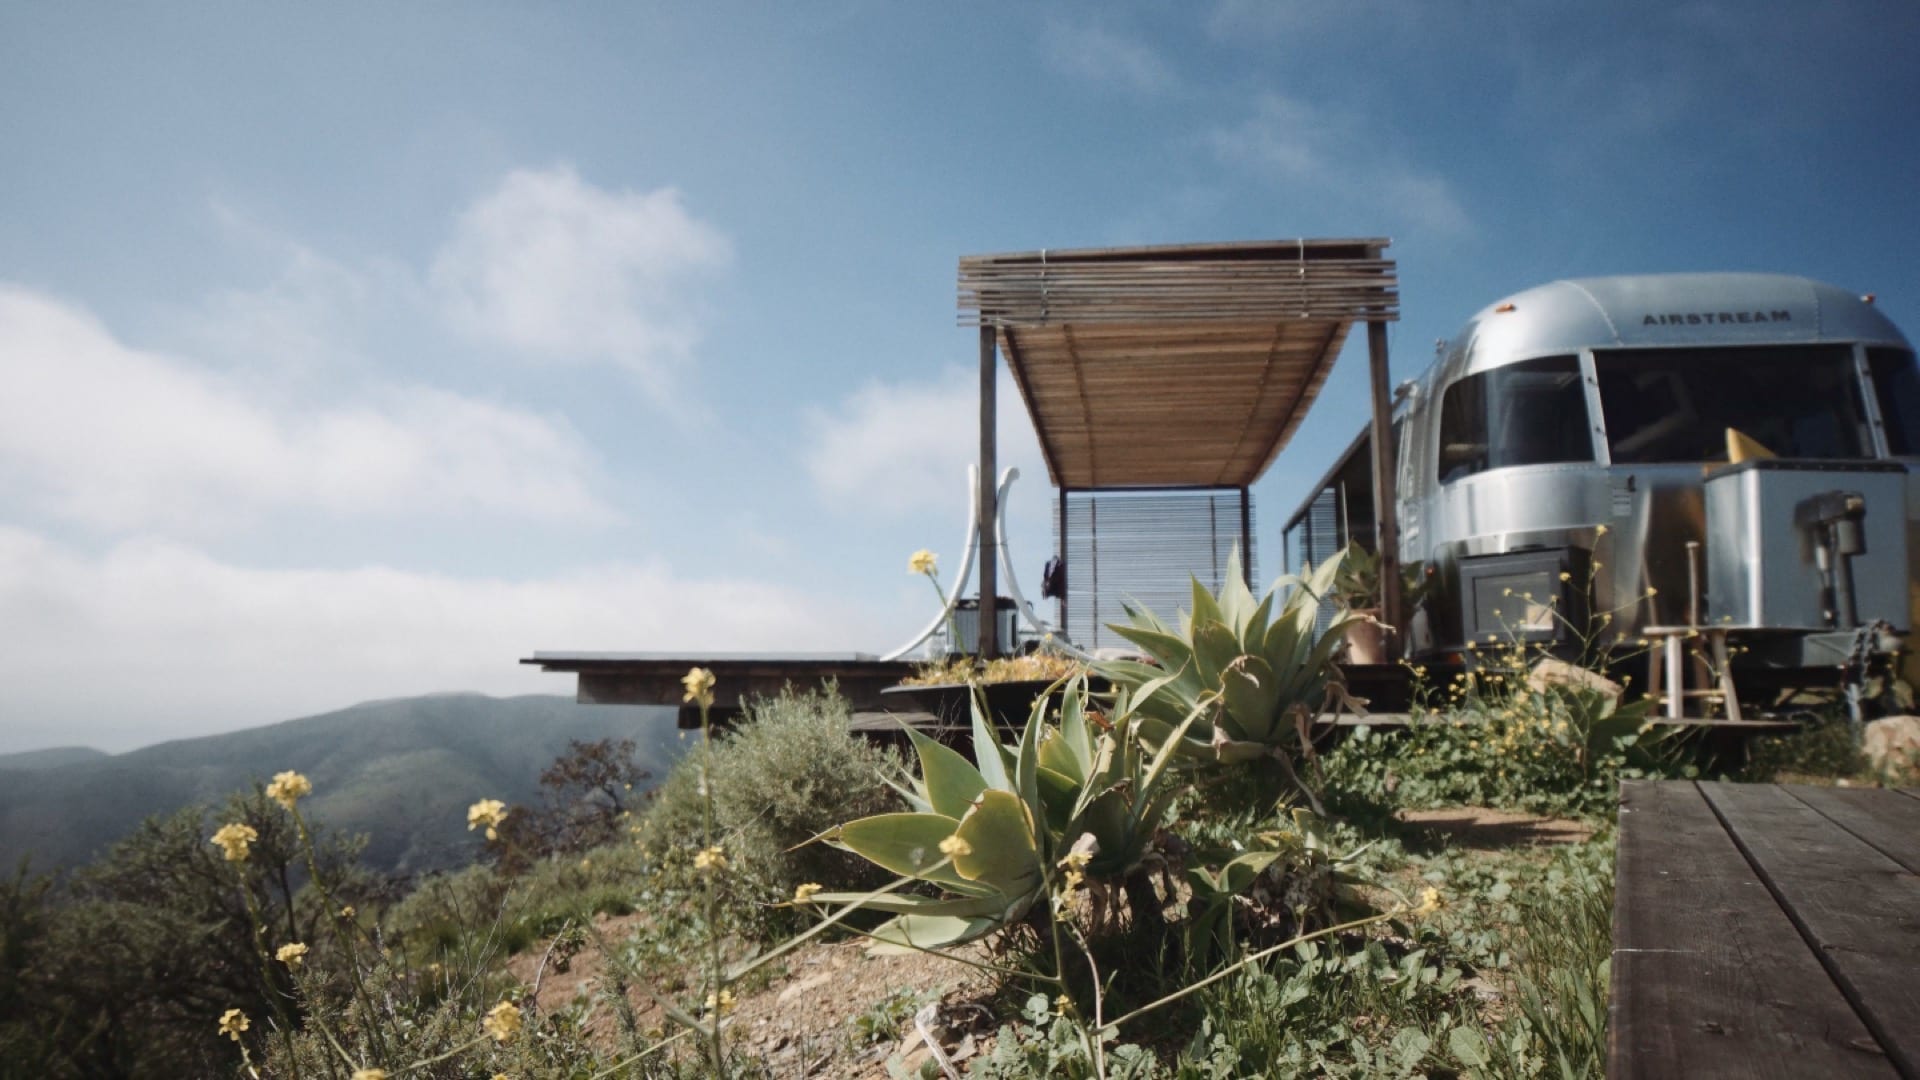 View of a silver colored RV with a temporary patio overlooking a valley.